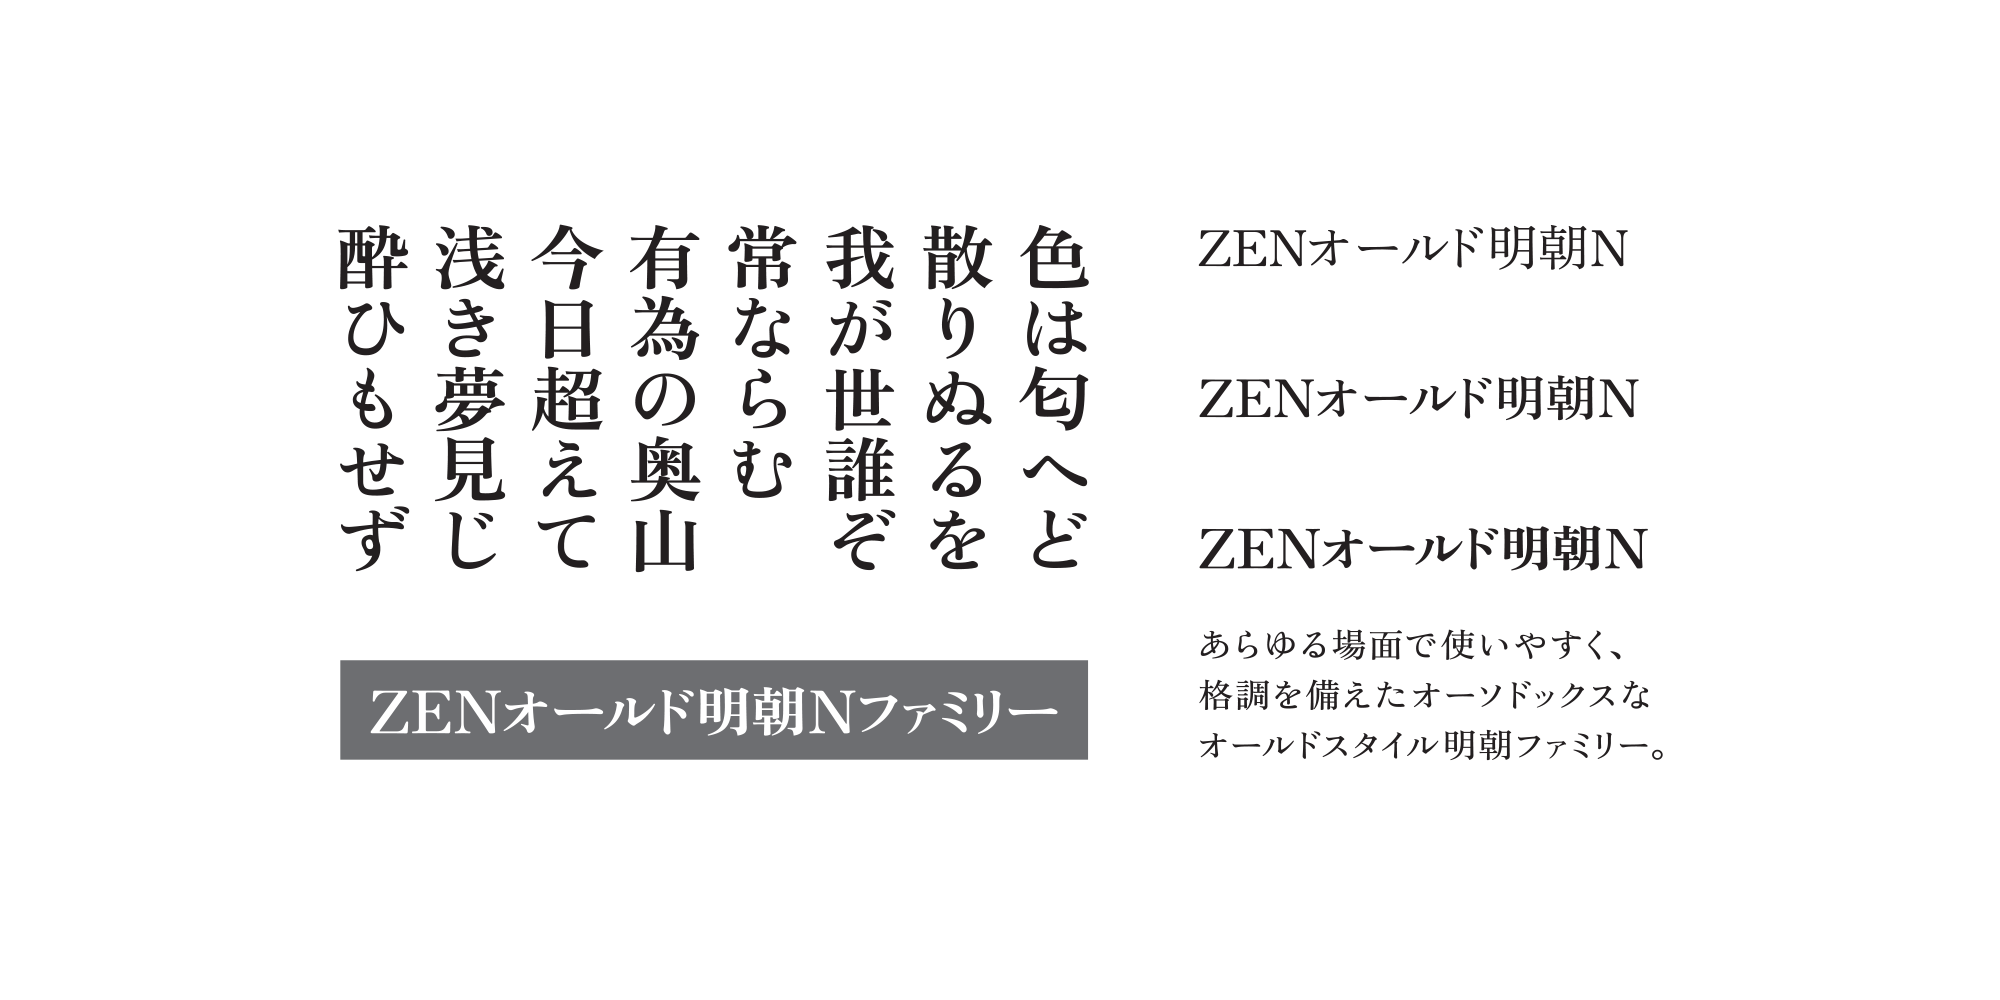 Card displaying Zen Old Mincho typeface in various styles